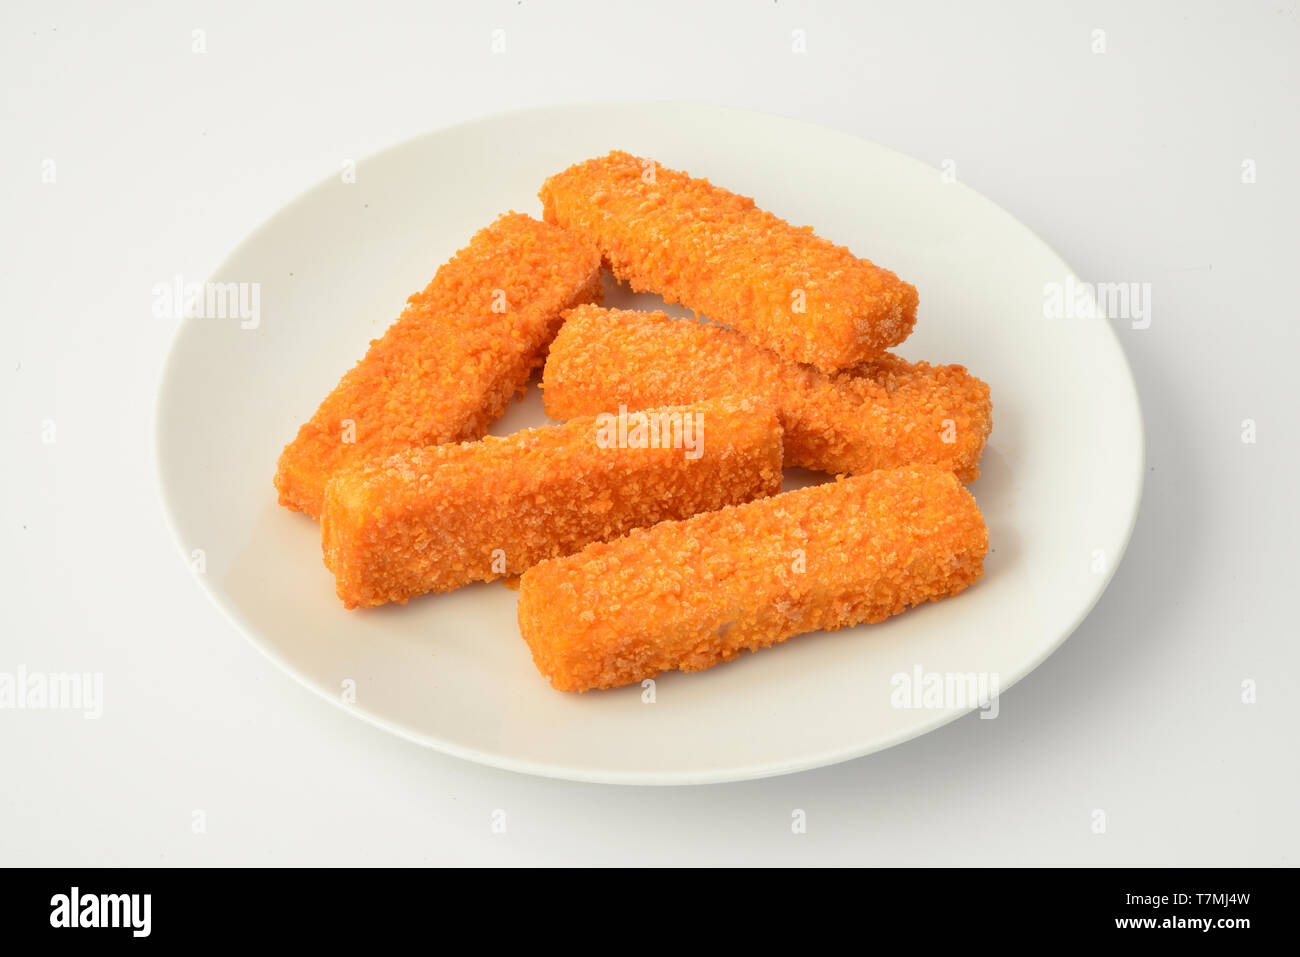 Fish Fingers, Fish Sticks on a white plate. Studio picture against